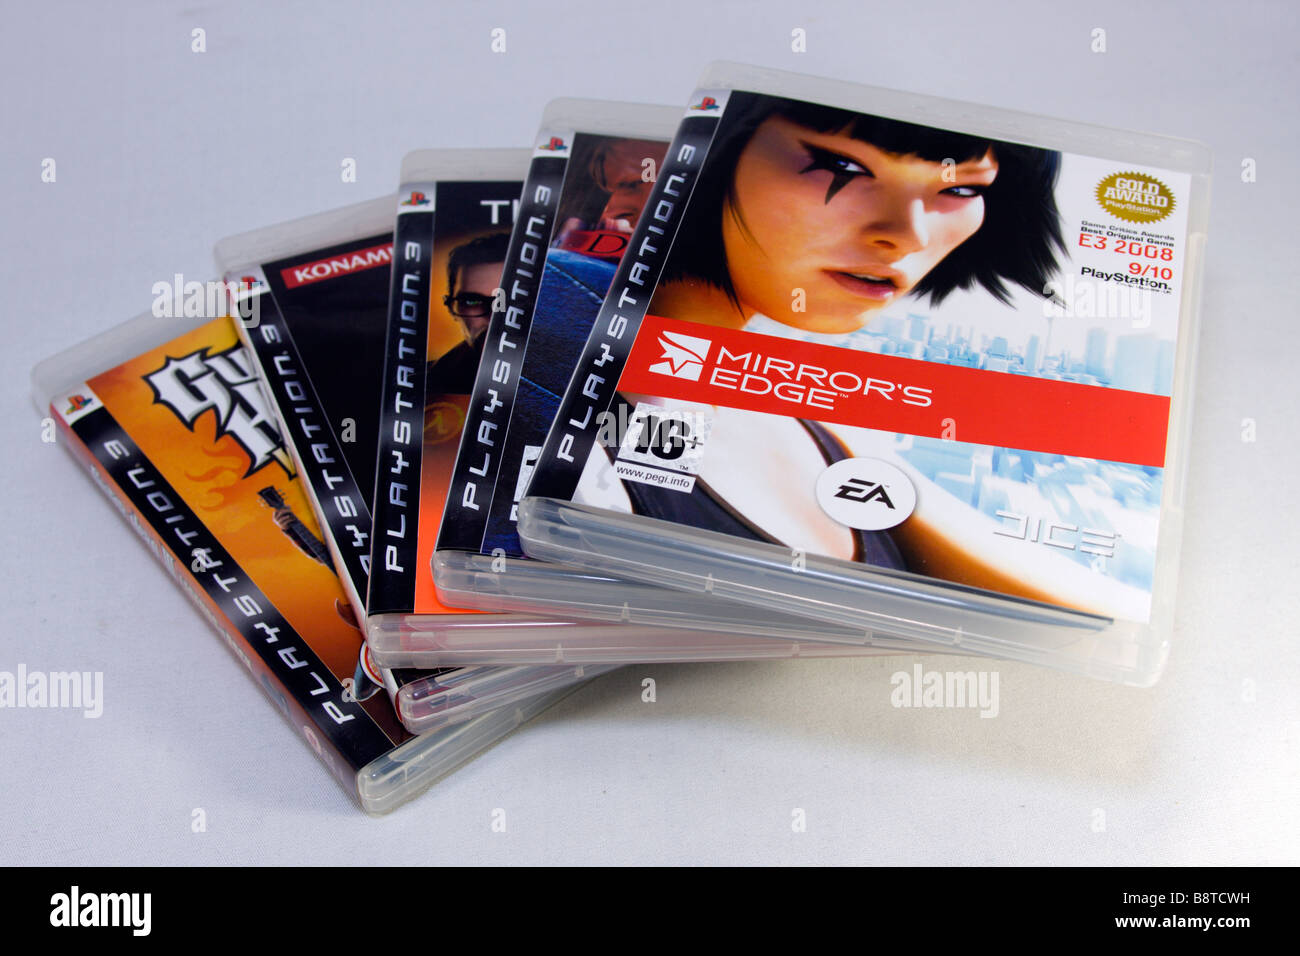 Bunch of Sony Playstation 3 video games. Stock Photo